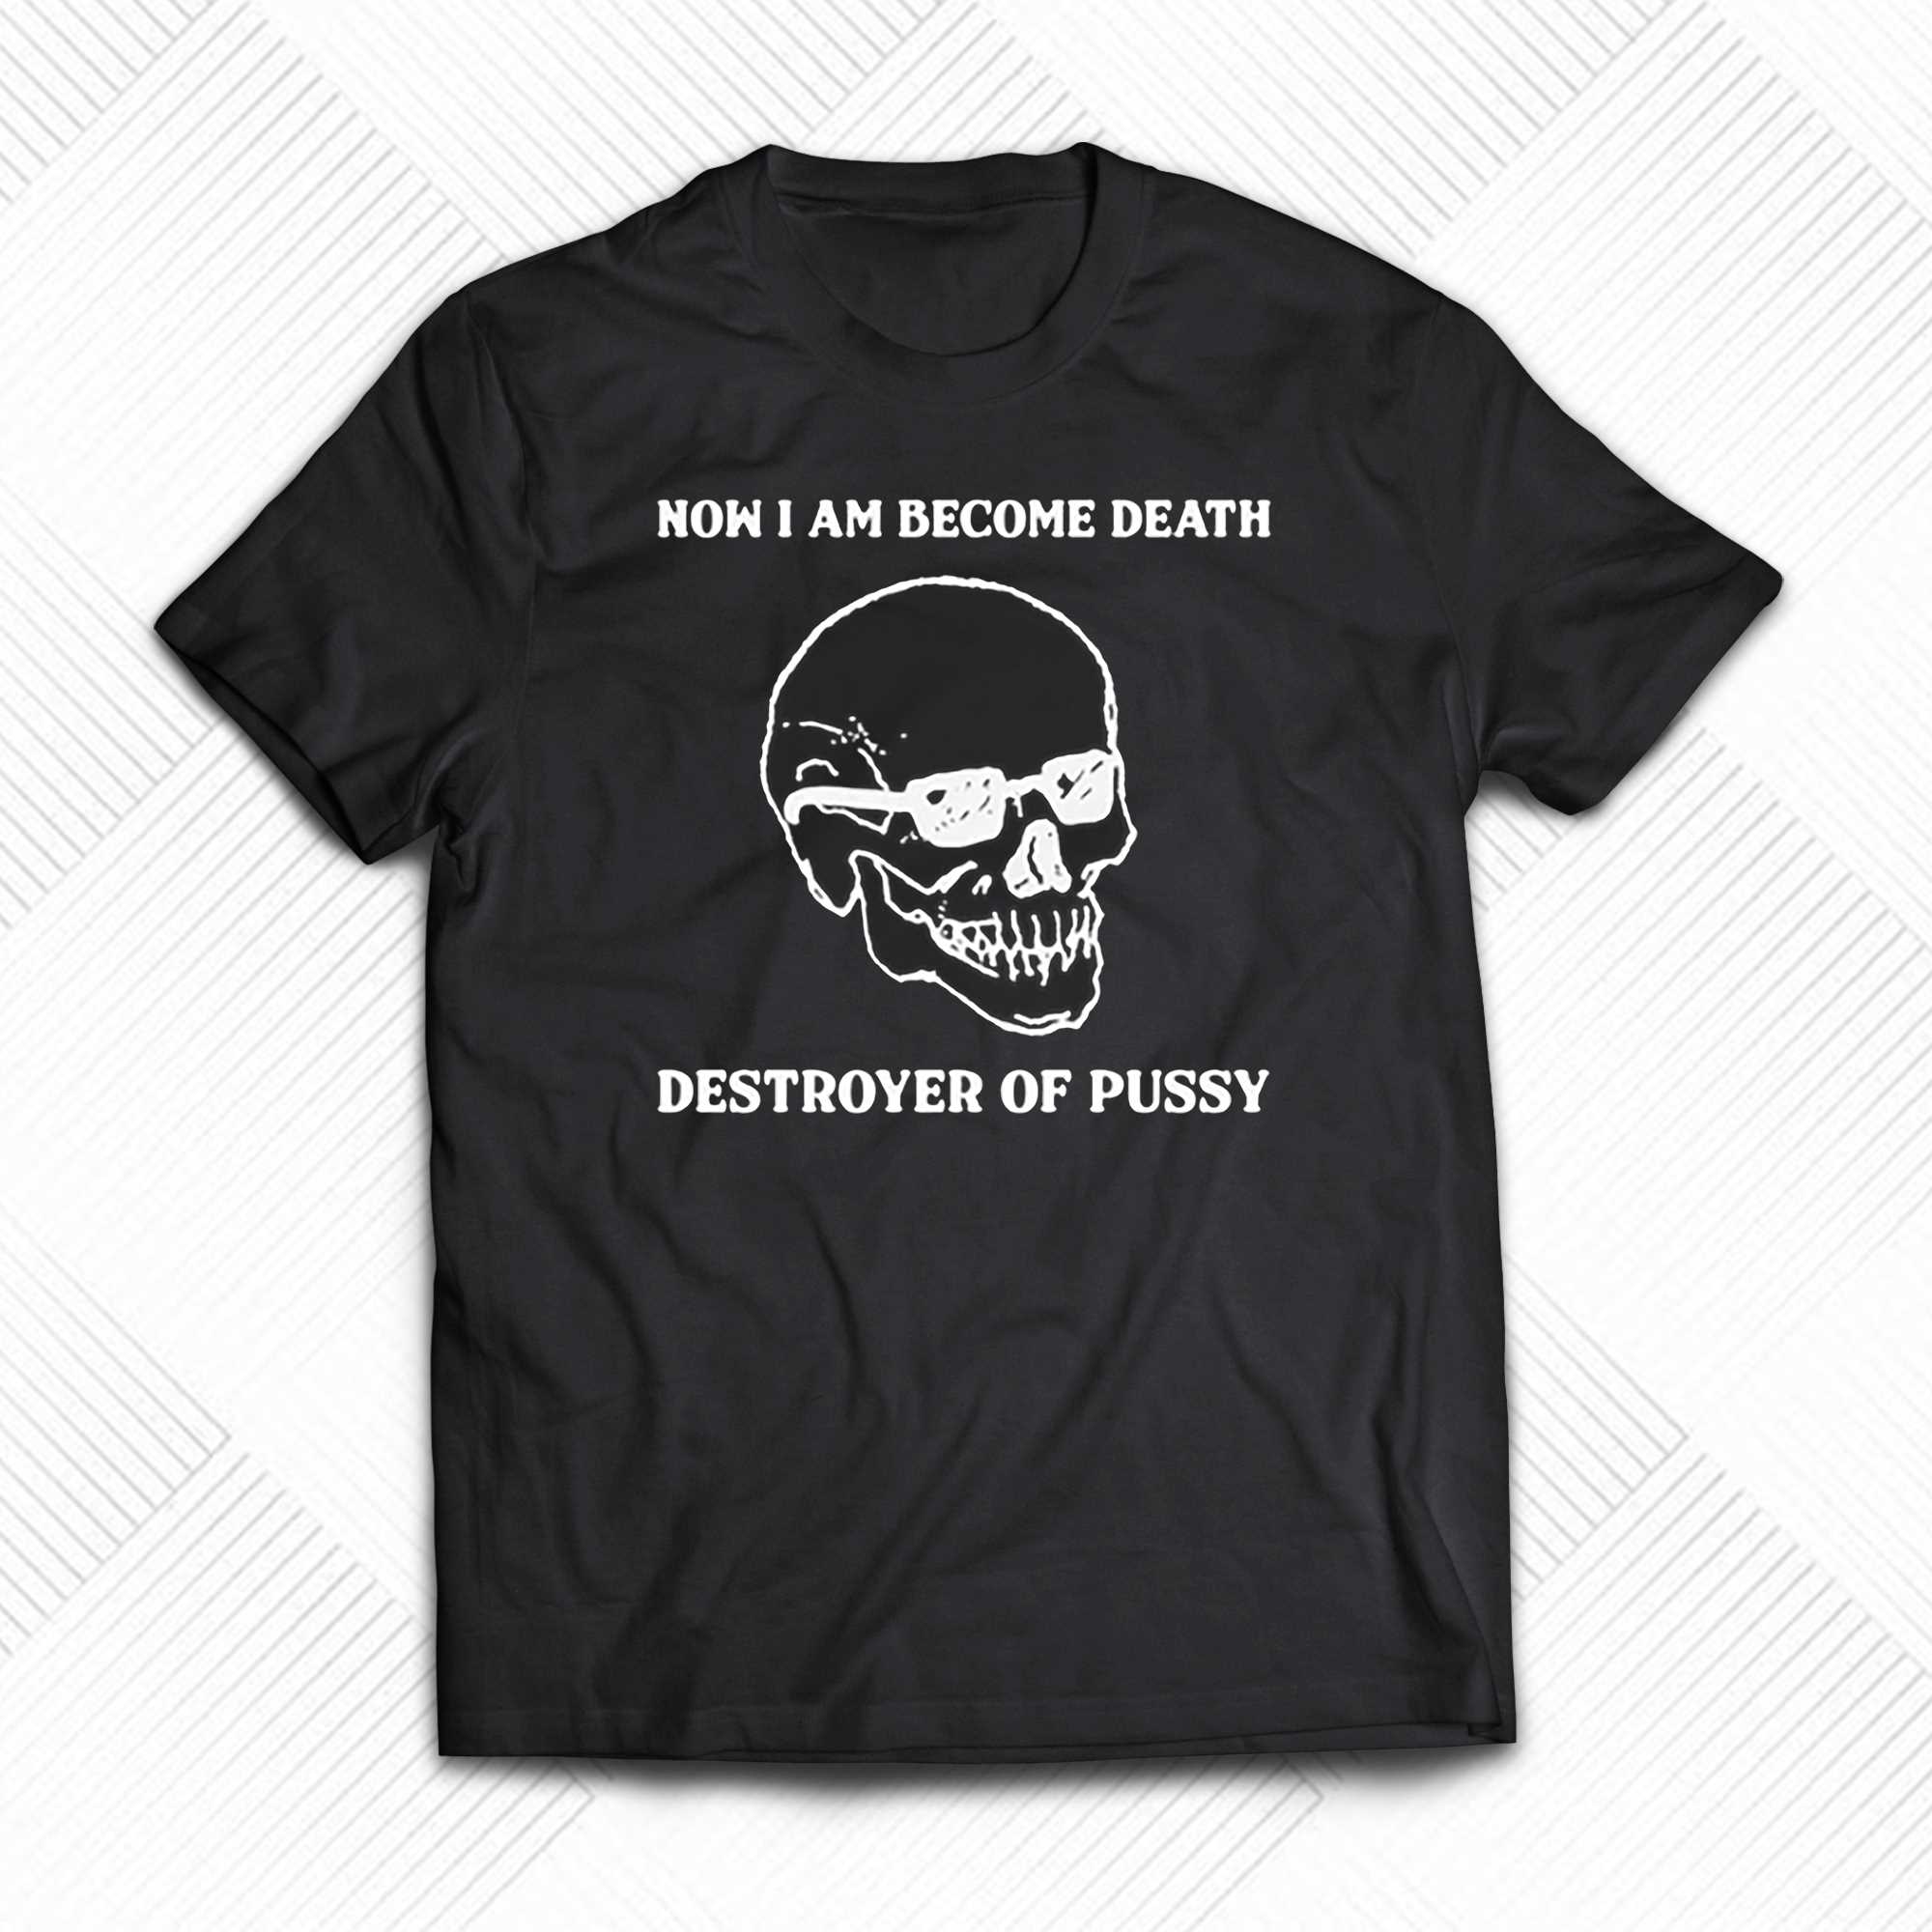 now i am become death destroyer of pussy t shirt 1 1